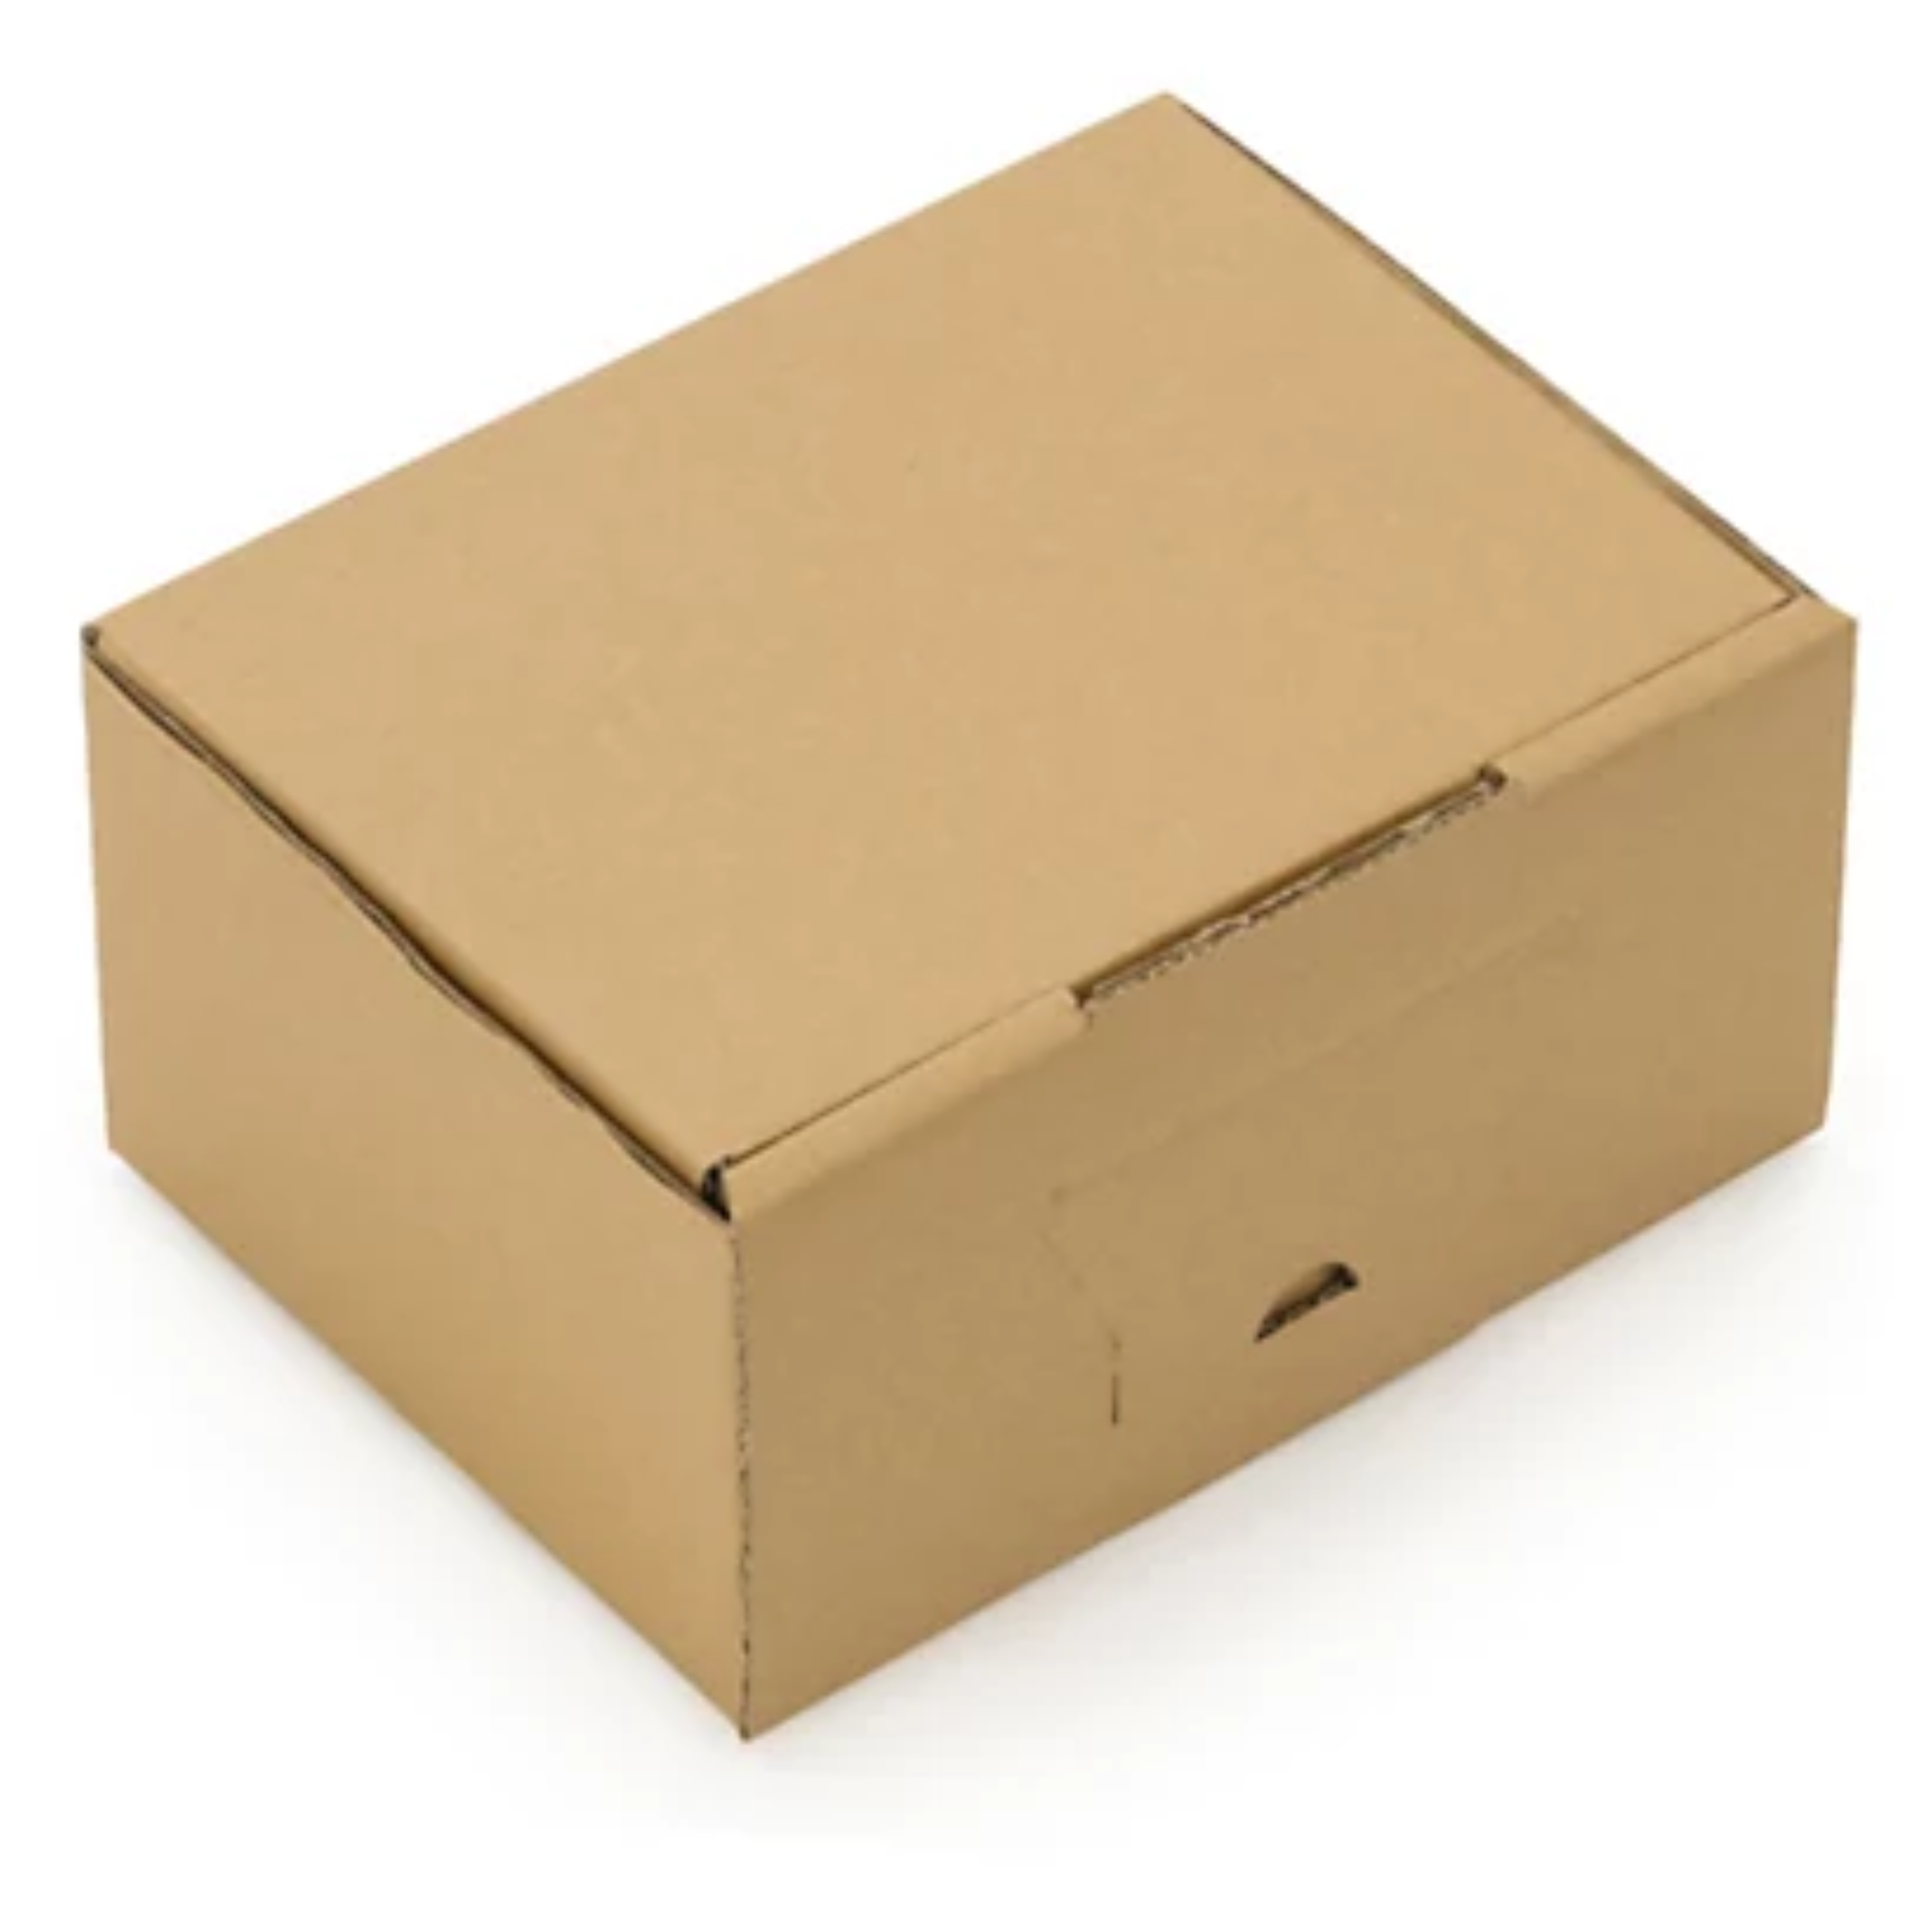 Quick Pack Ecommerce Postal Mailer Box